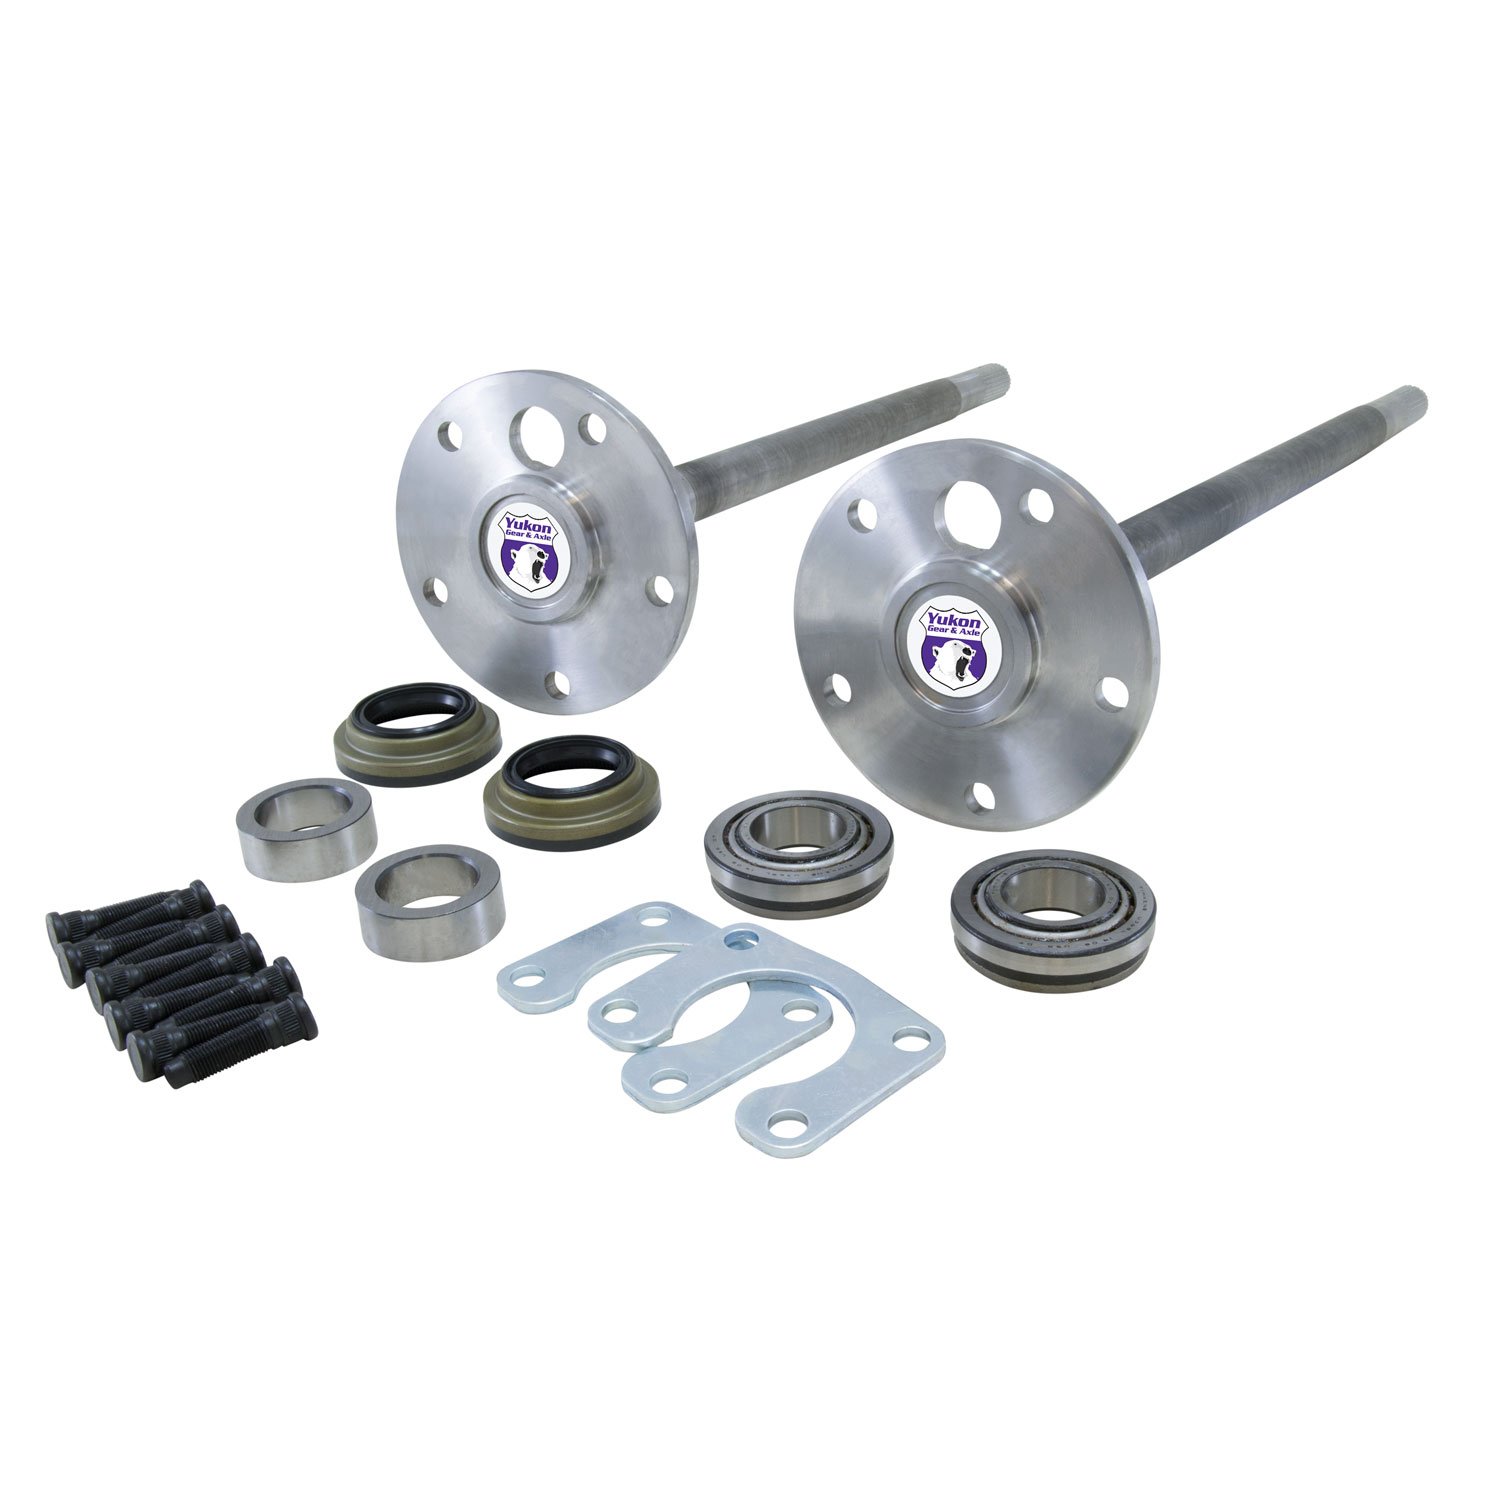 1541H Alloy Rear Axle Kit For Ford 9